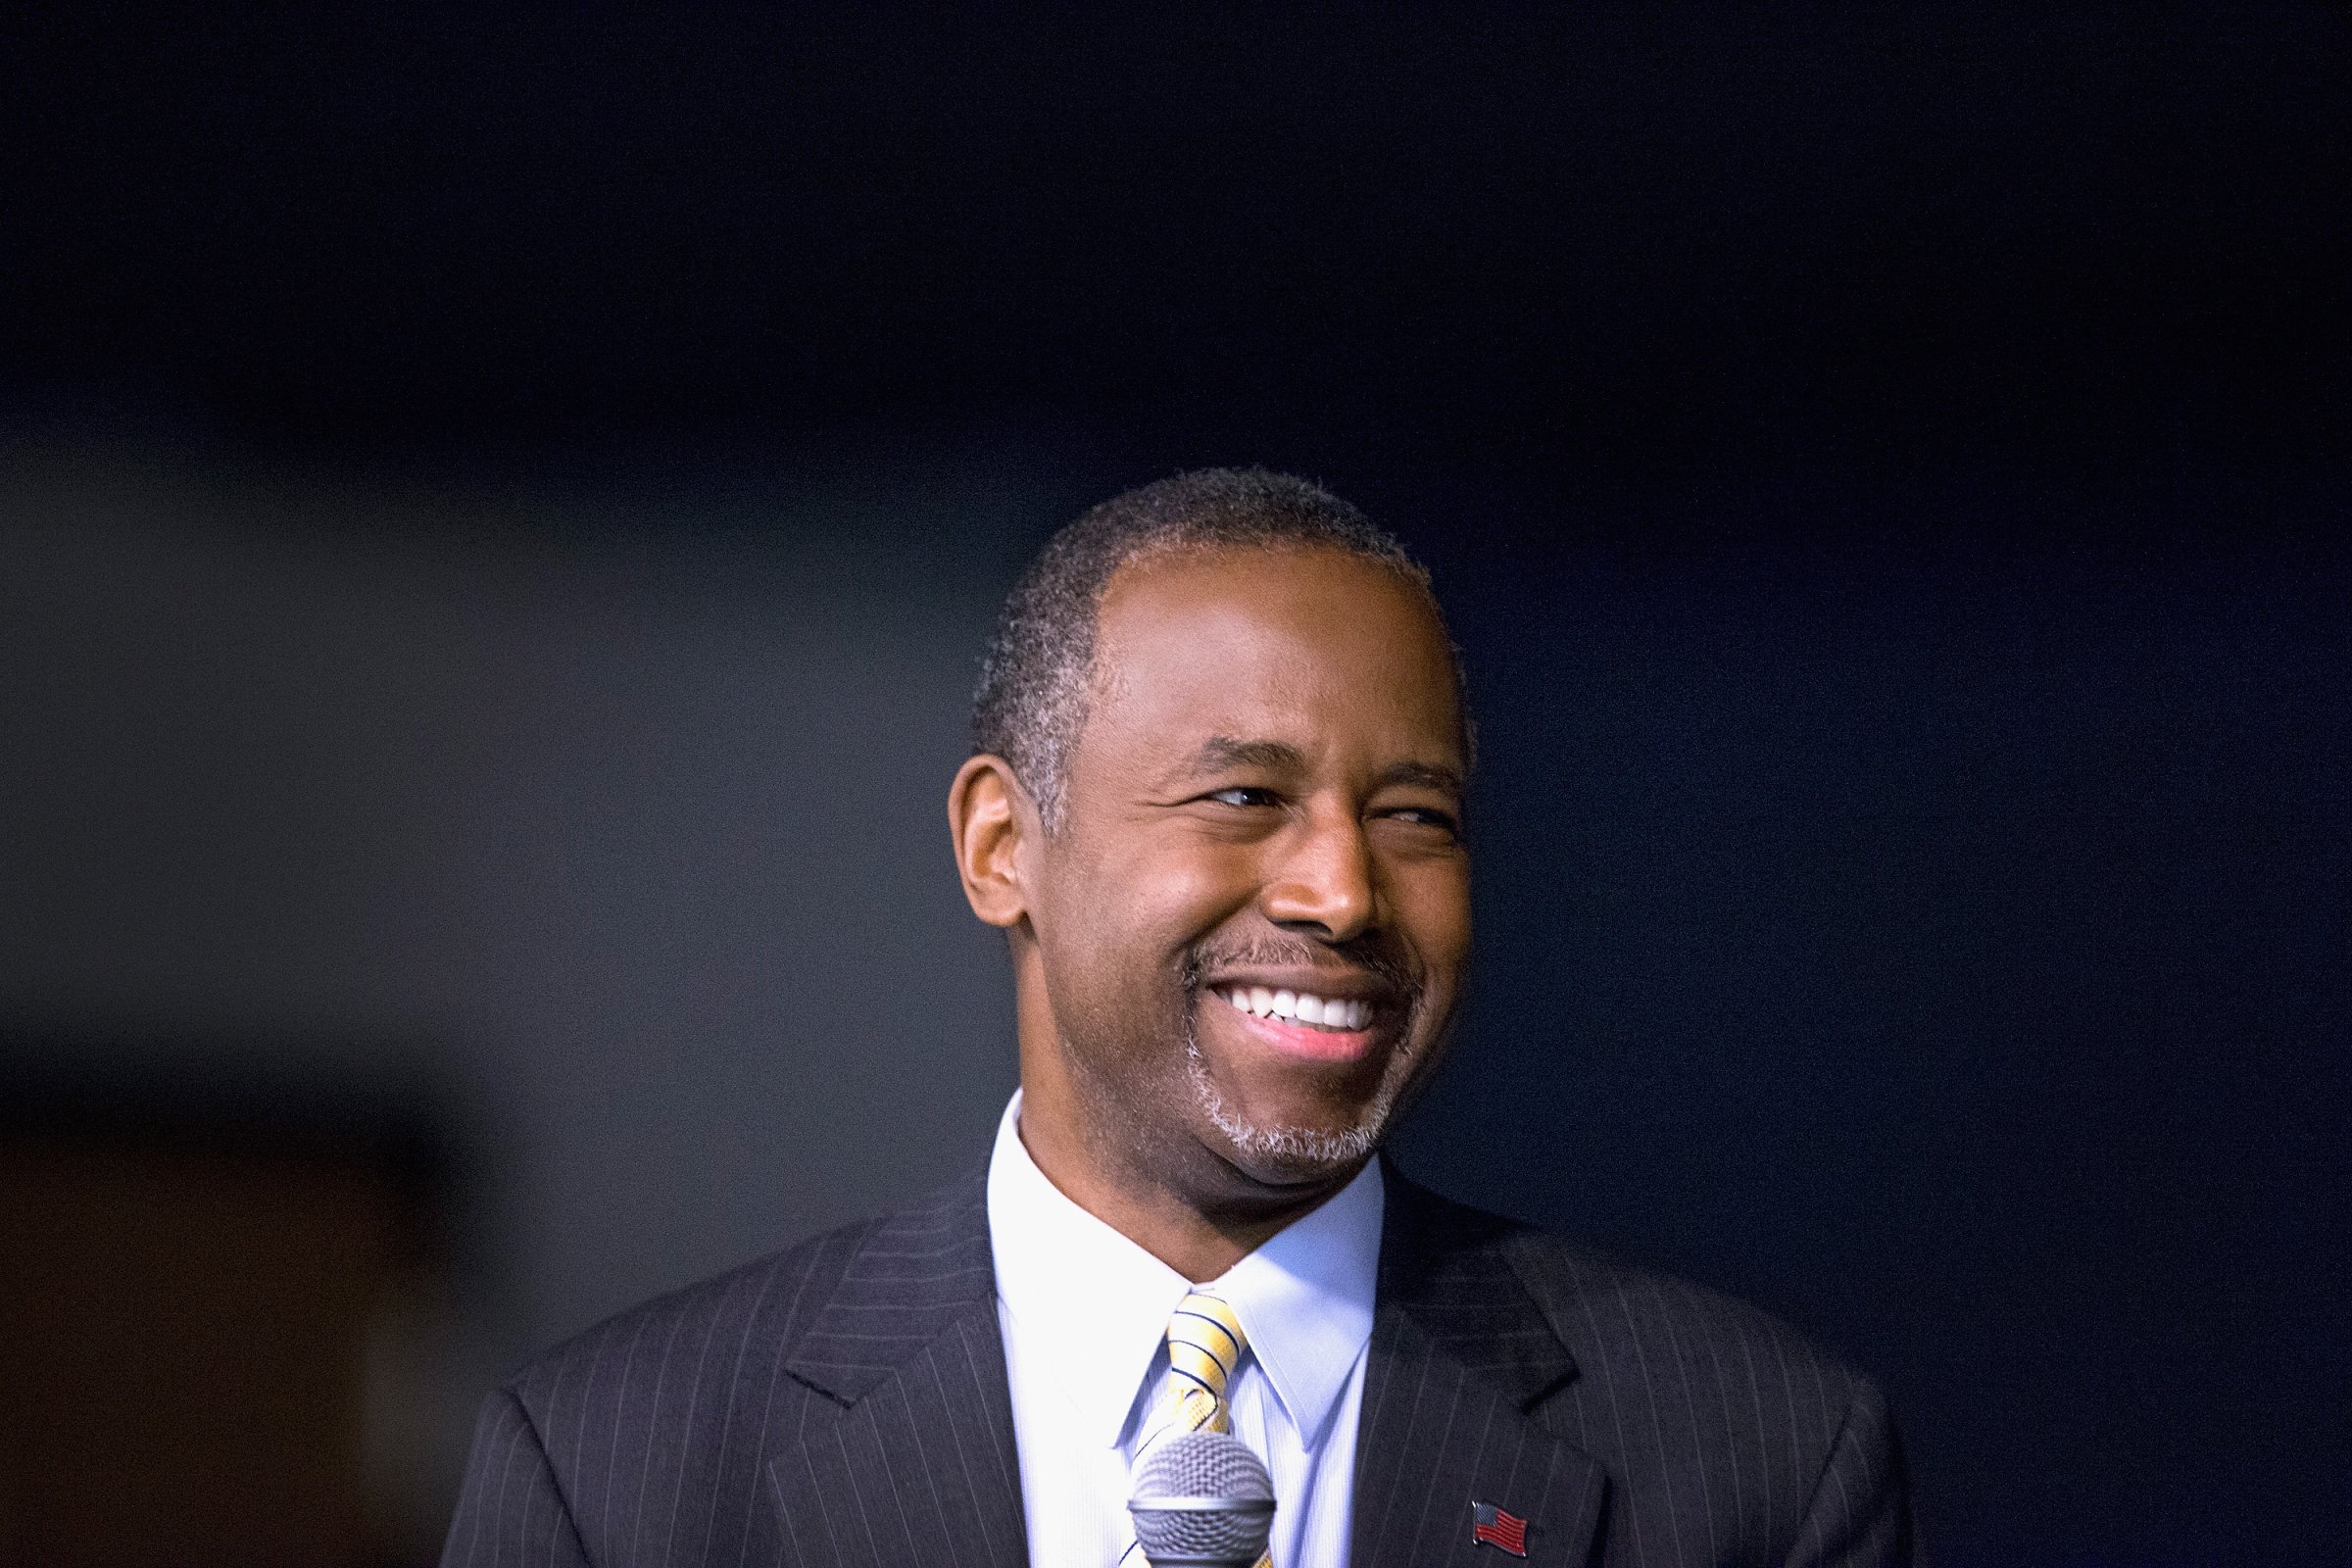 Republican presidential candidate Ben Carson speaks to guests at a barbeque hosted by Jeff Kauffman in Wilton, Iowa on Nov. 22, 2015.